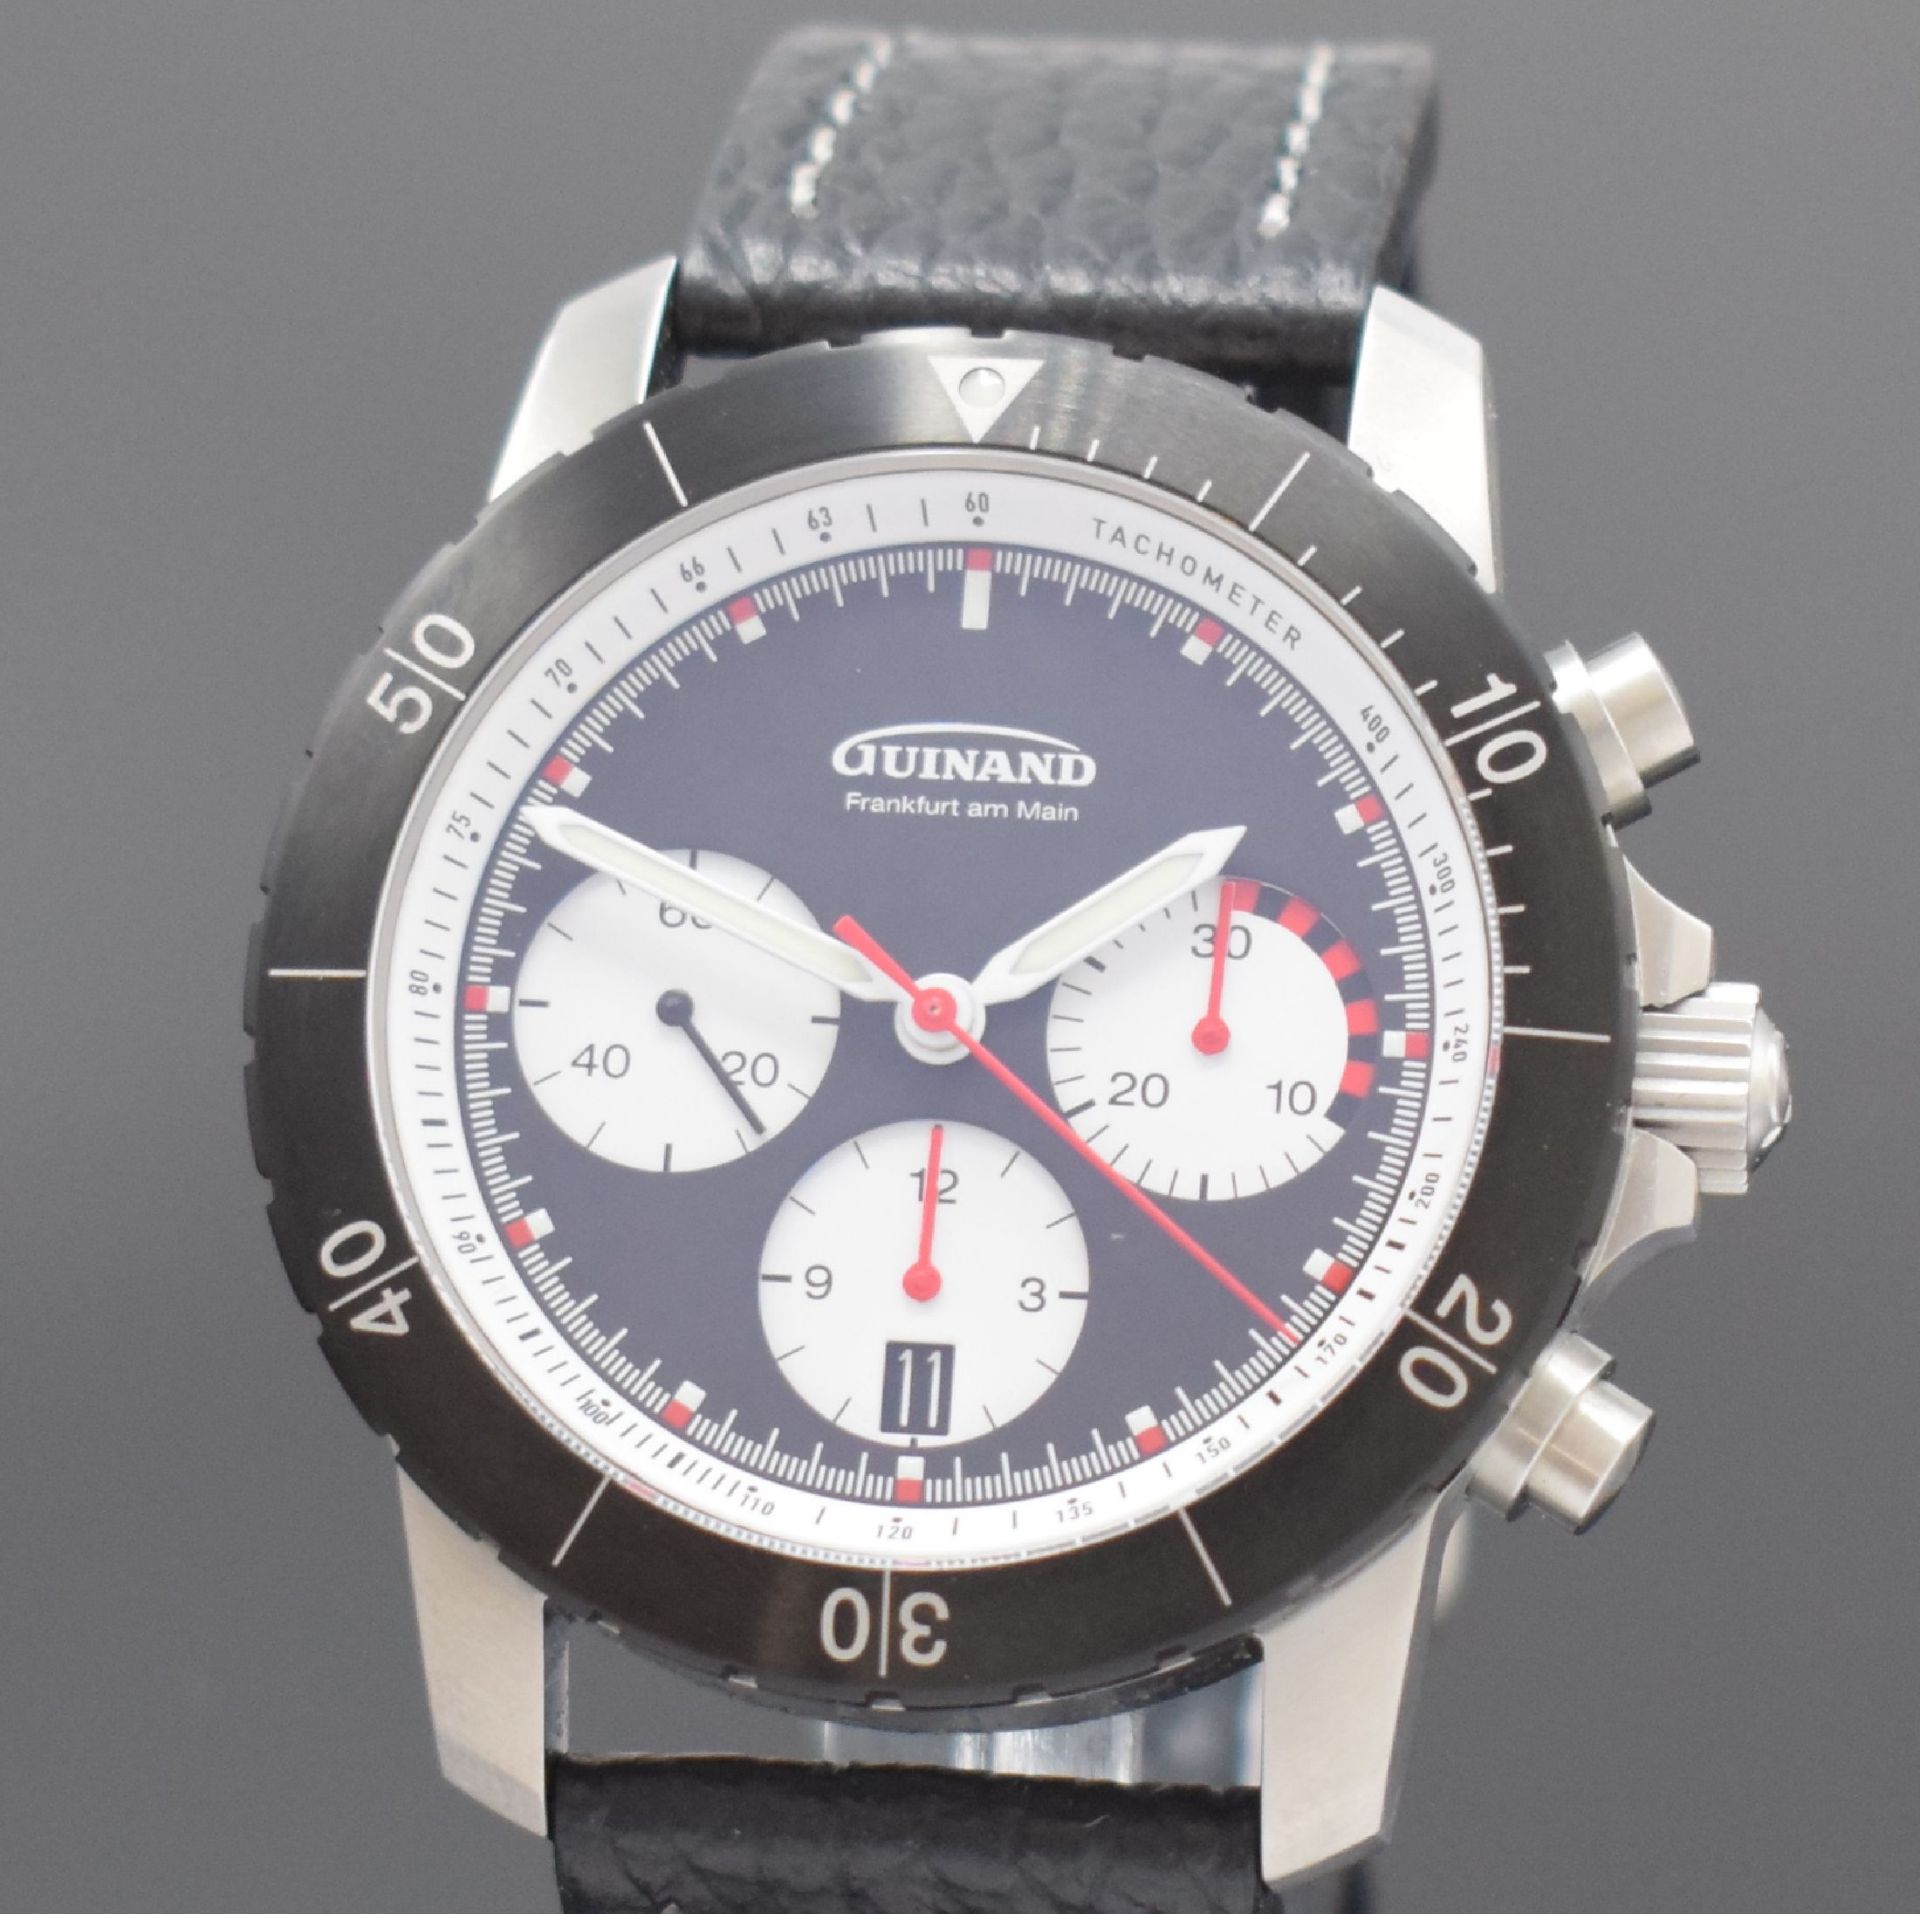 GUINAND Jubiläums-Armbandchronograph in Stahl, Automatik, - Image 2 of 8